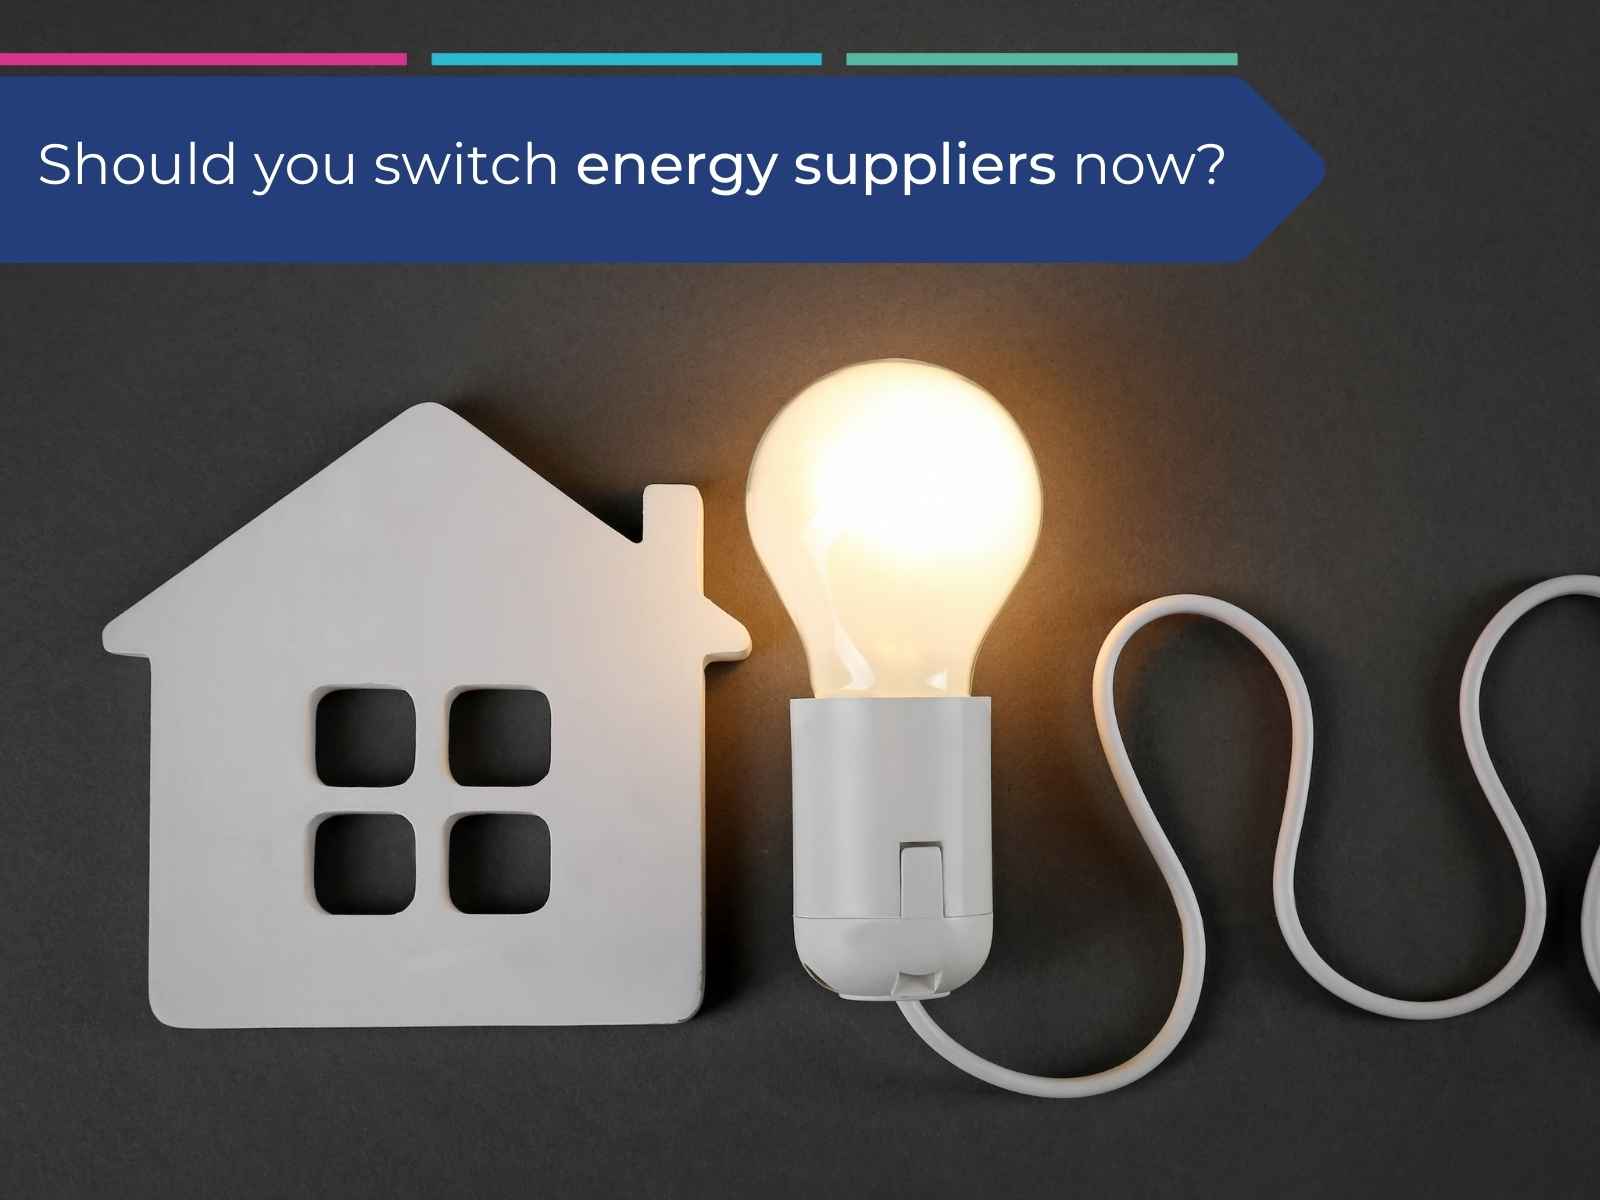 Should you switch energy suppliers?